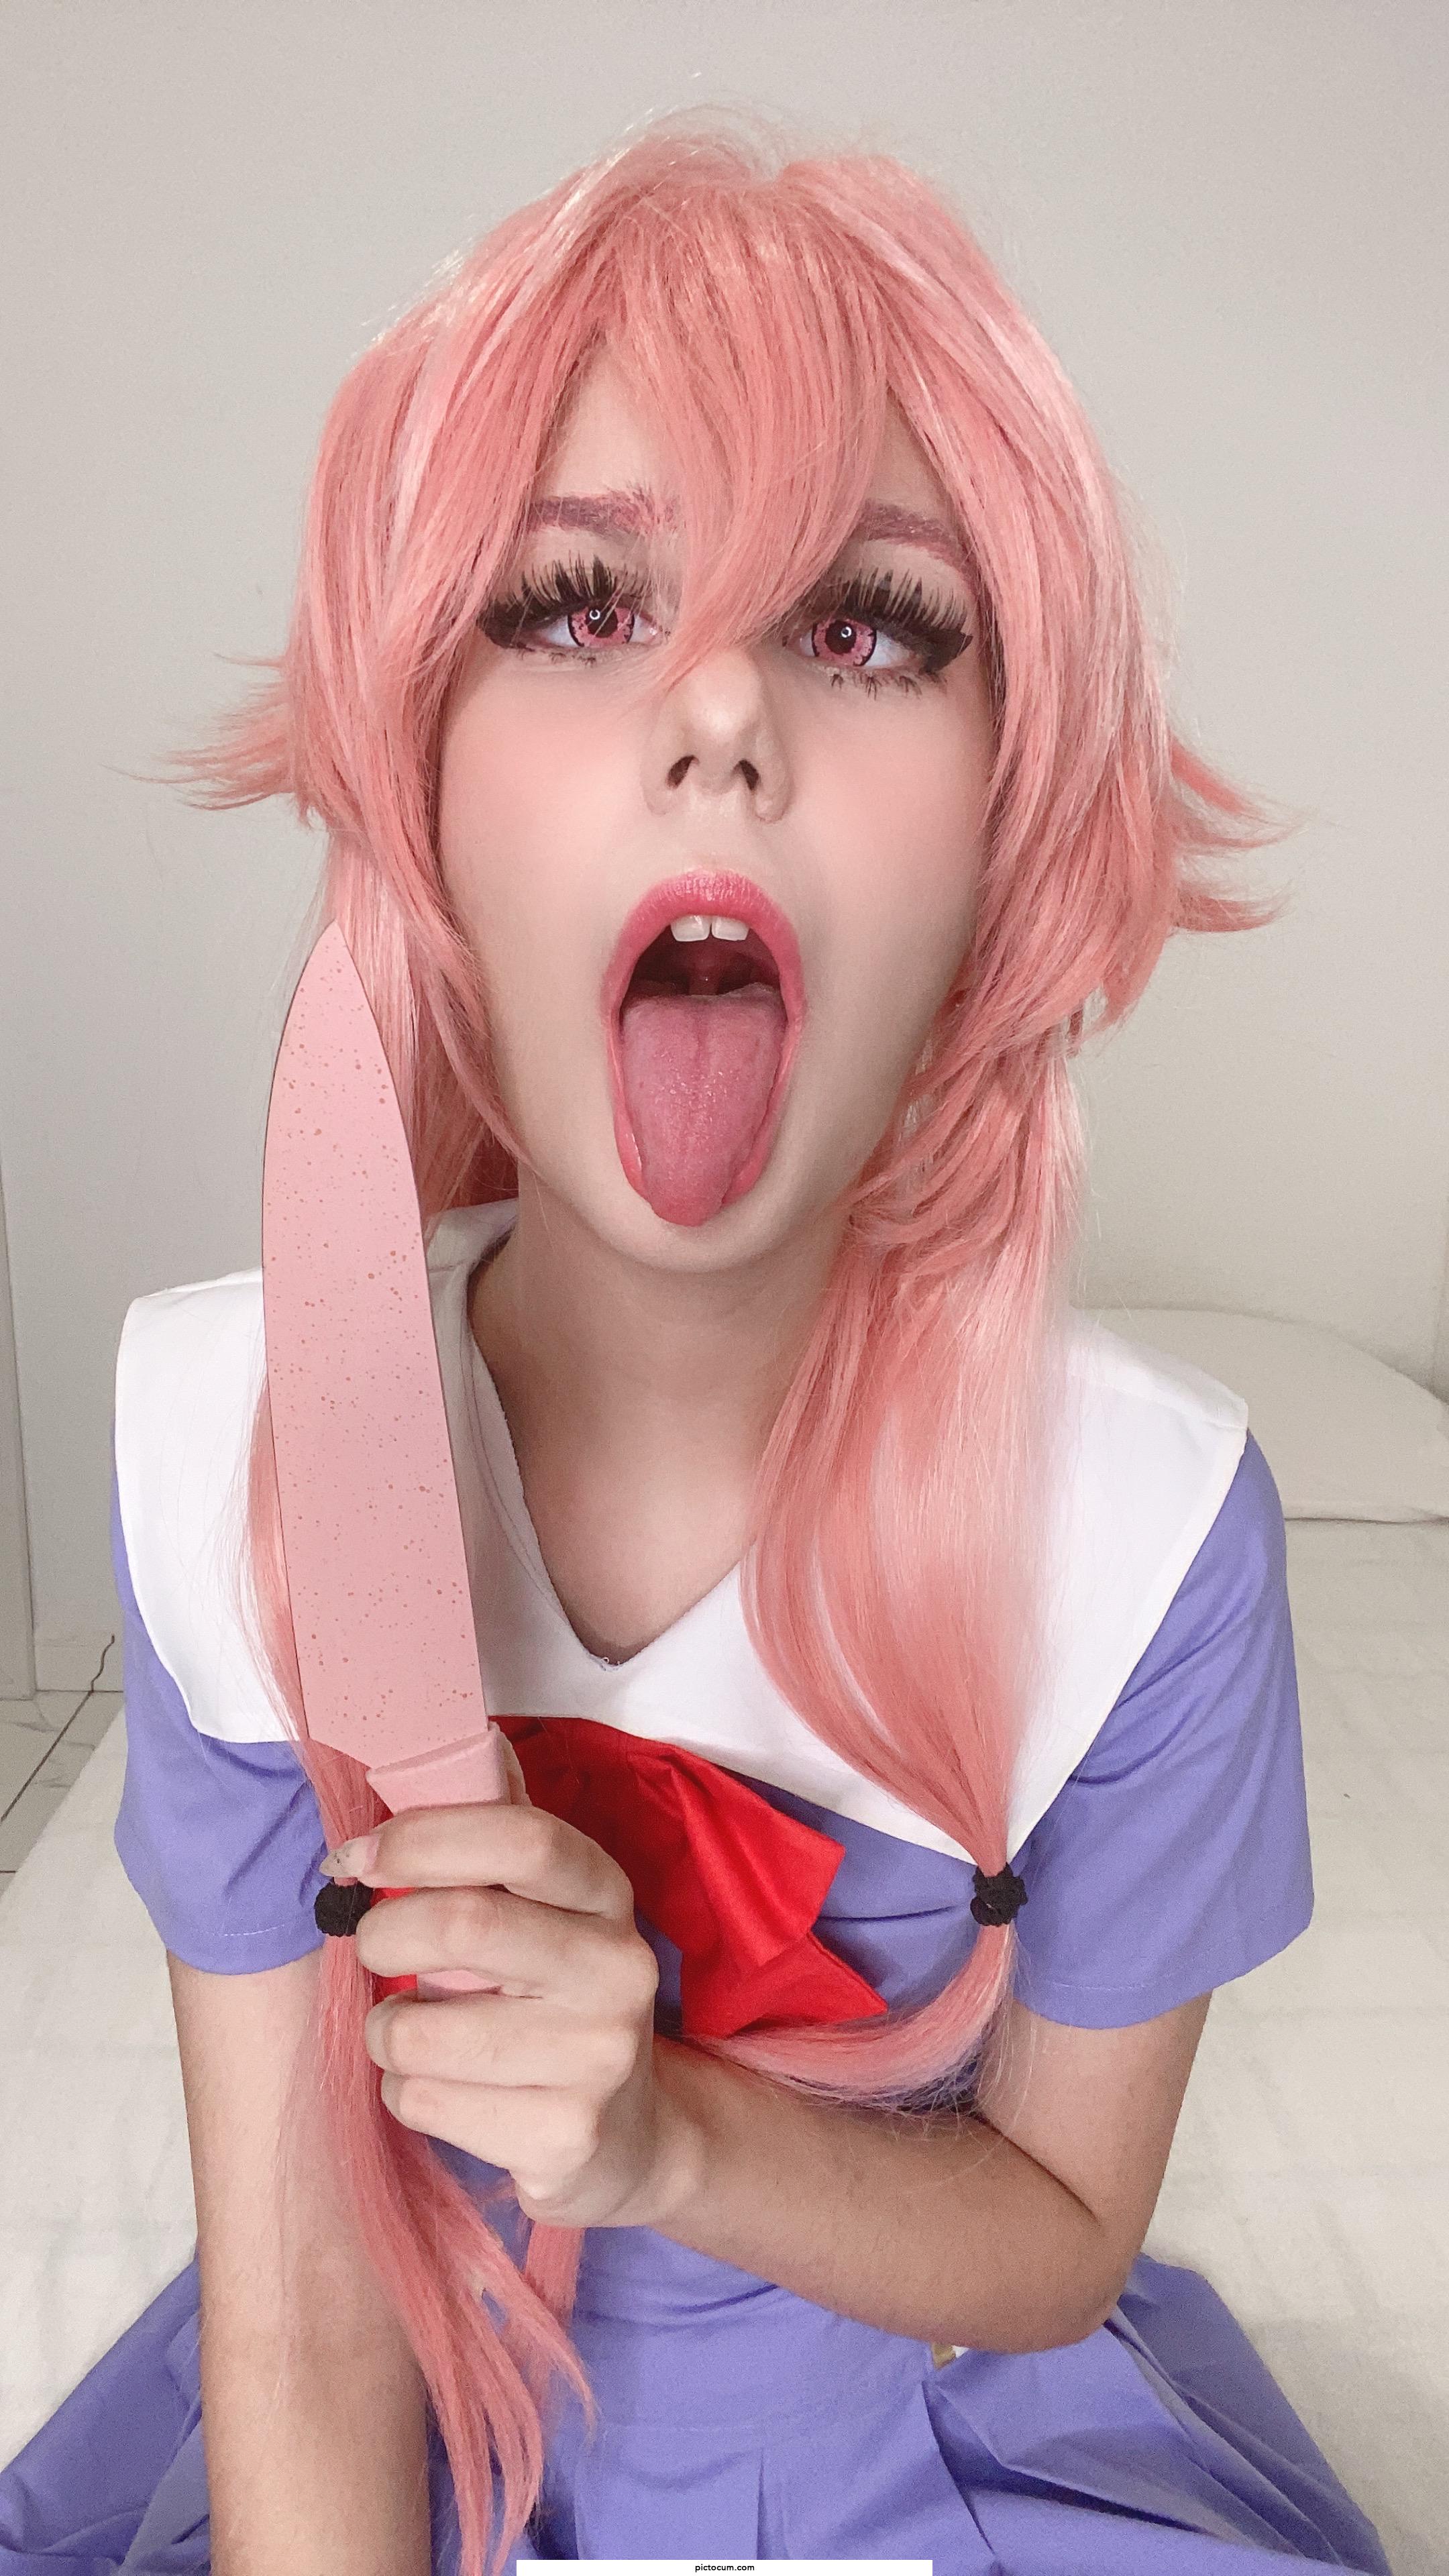 Yuno wants your milk over her cute face!